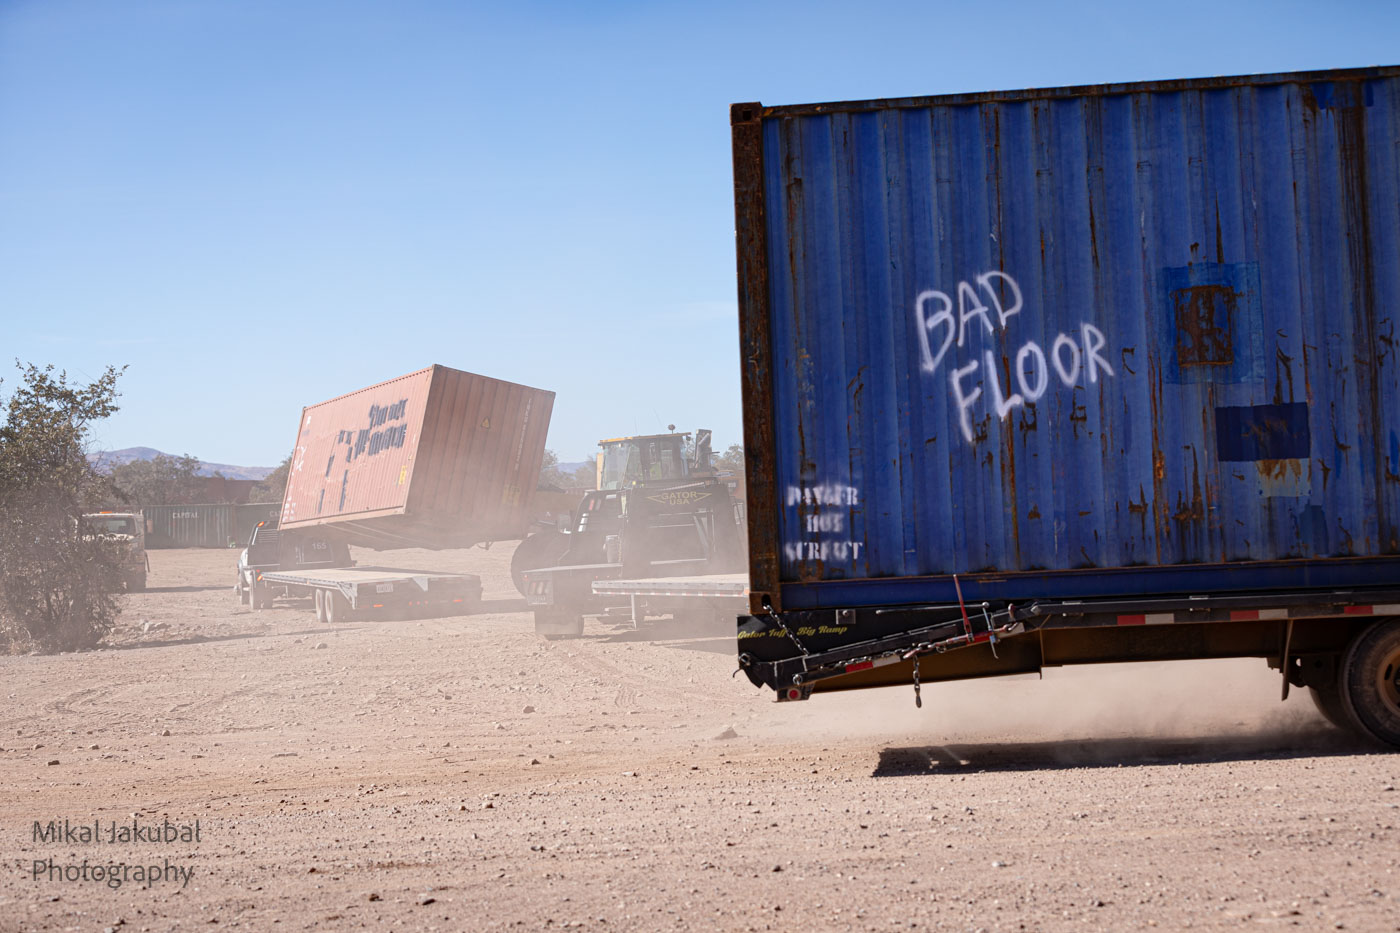 In the foreground, a blue shipping container sits on a trailer. It has the words "bad floor" spray painted on the side, a reference to why the container was rejected by shipping companies and sold as surplus. In the background a large forklift is kicking up dust as it loads a shipping container onto a flatbed trailer.